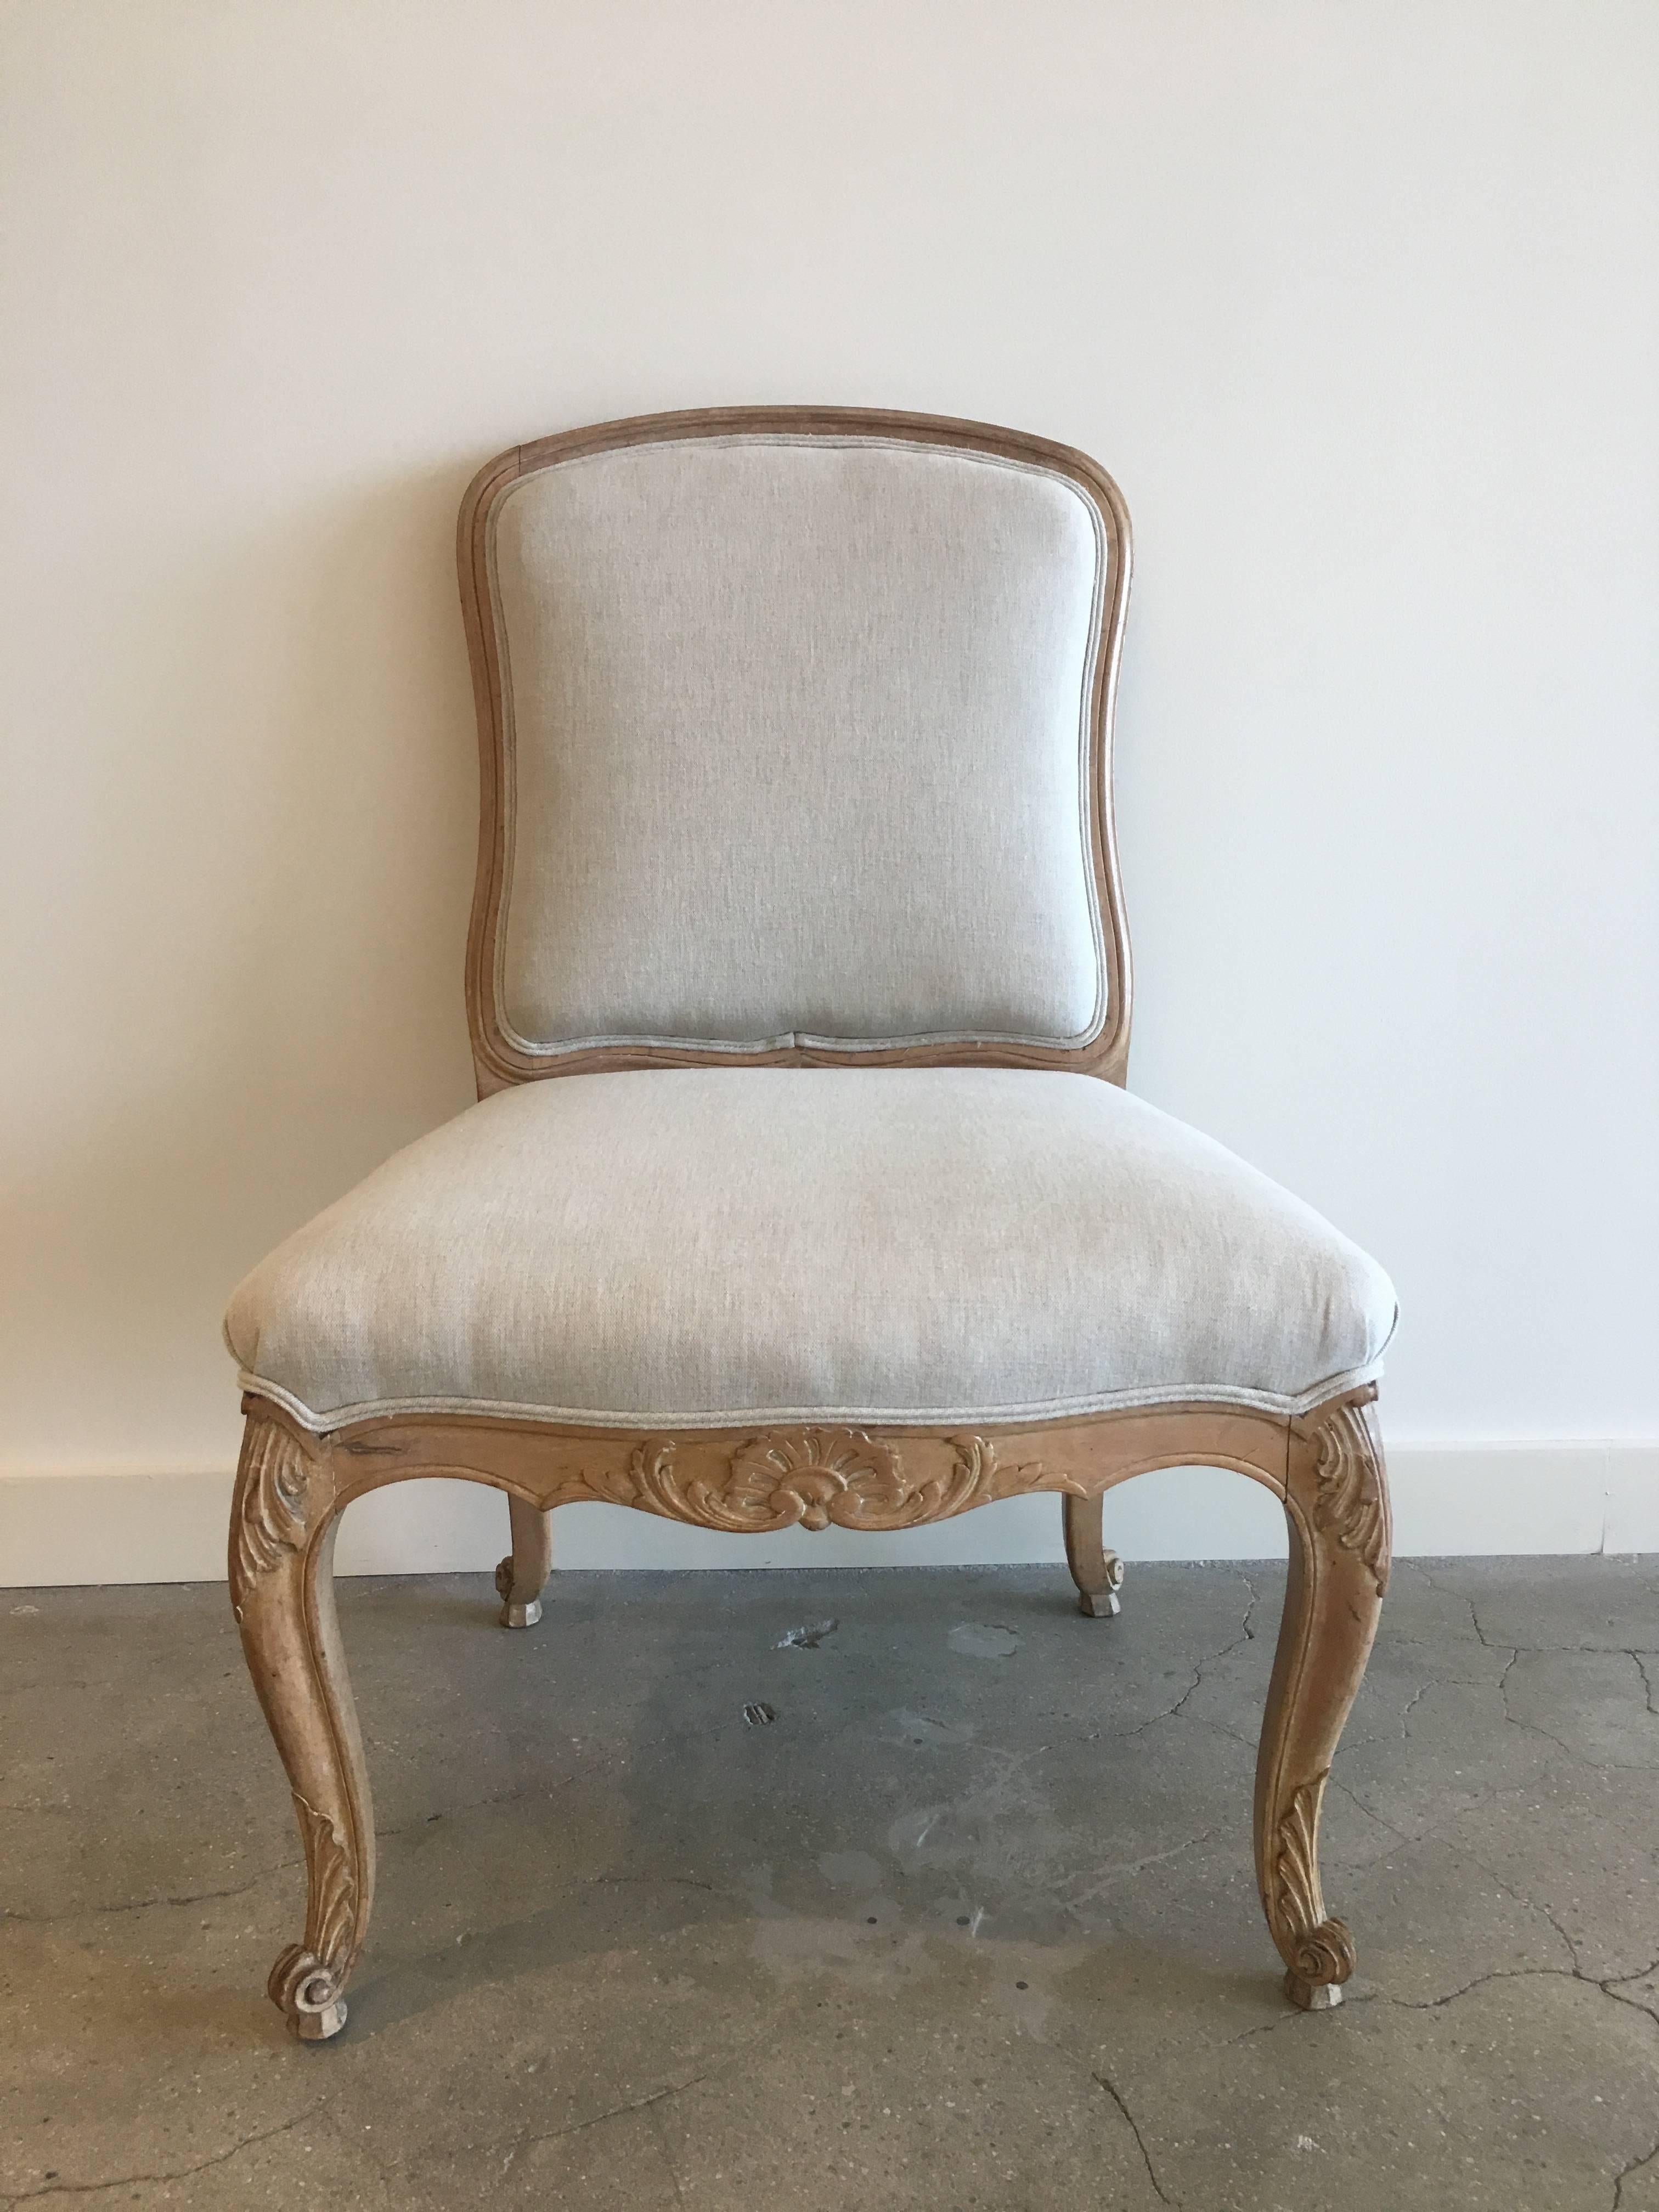 Set of six Louis XV style side chairs. Cerused wood frames. Signed G Fradon. Newly reupholstered.